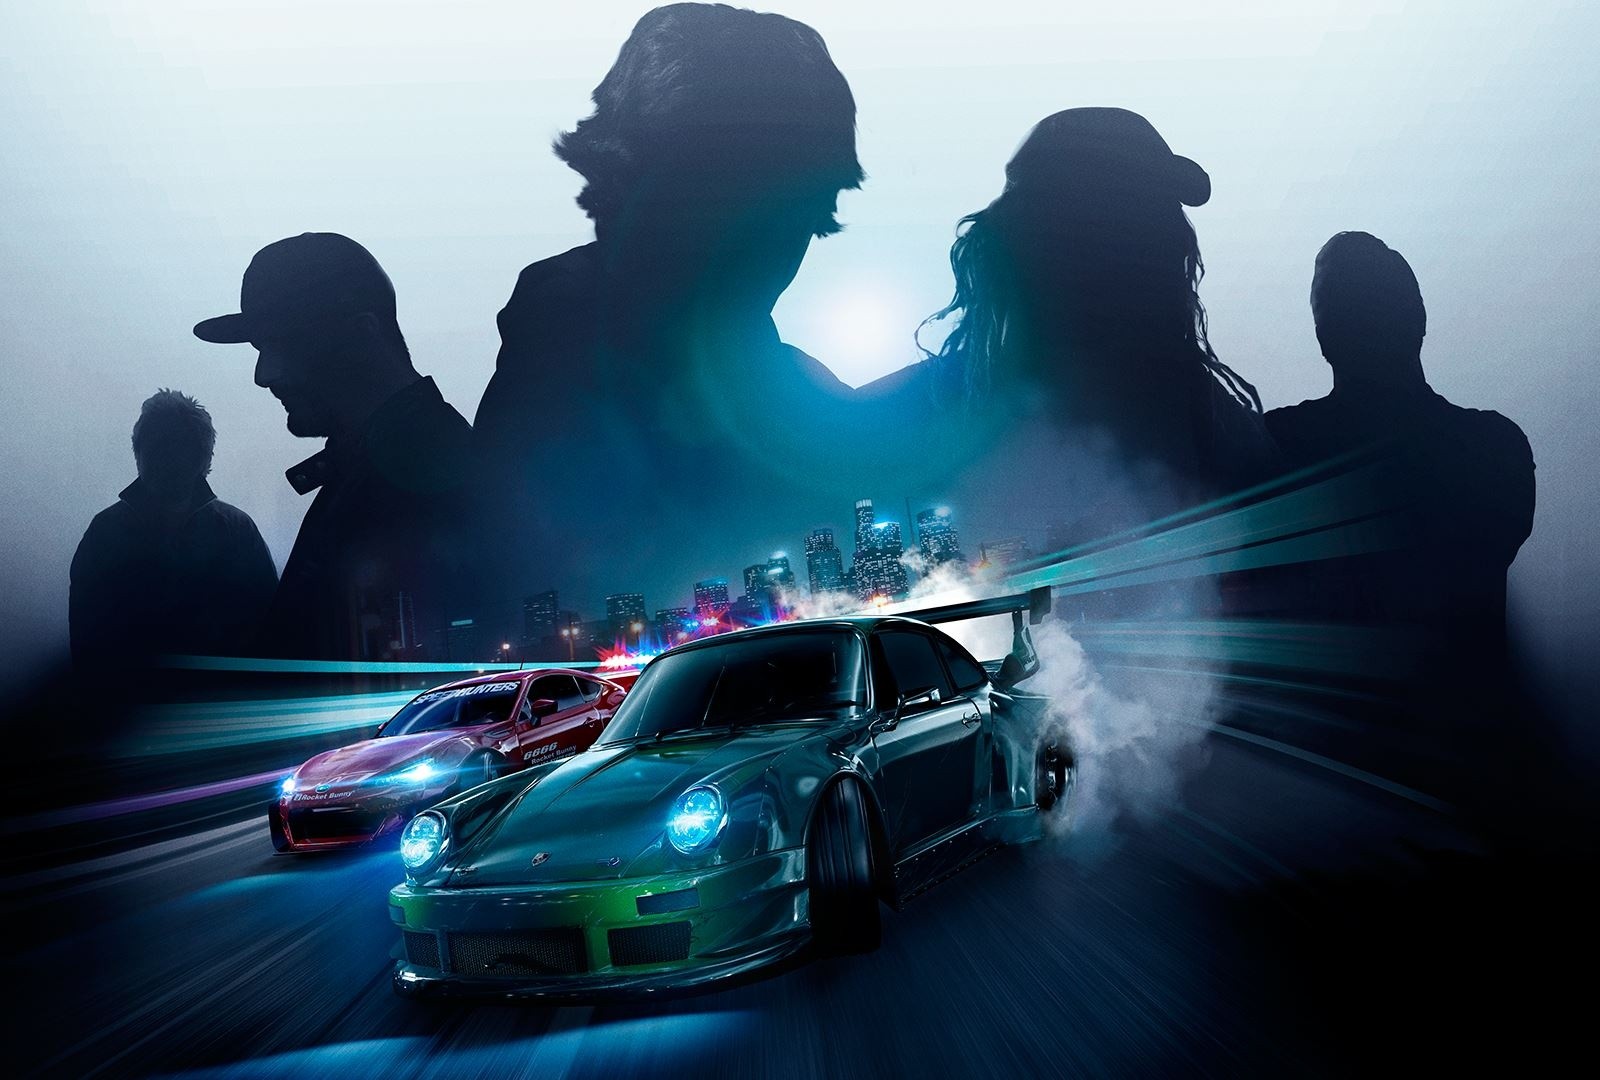 need for speed 2015 game download free full version pc